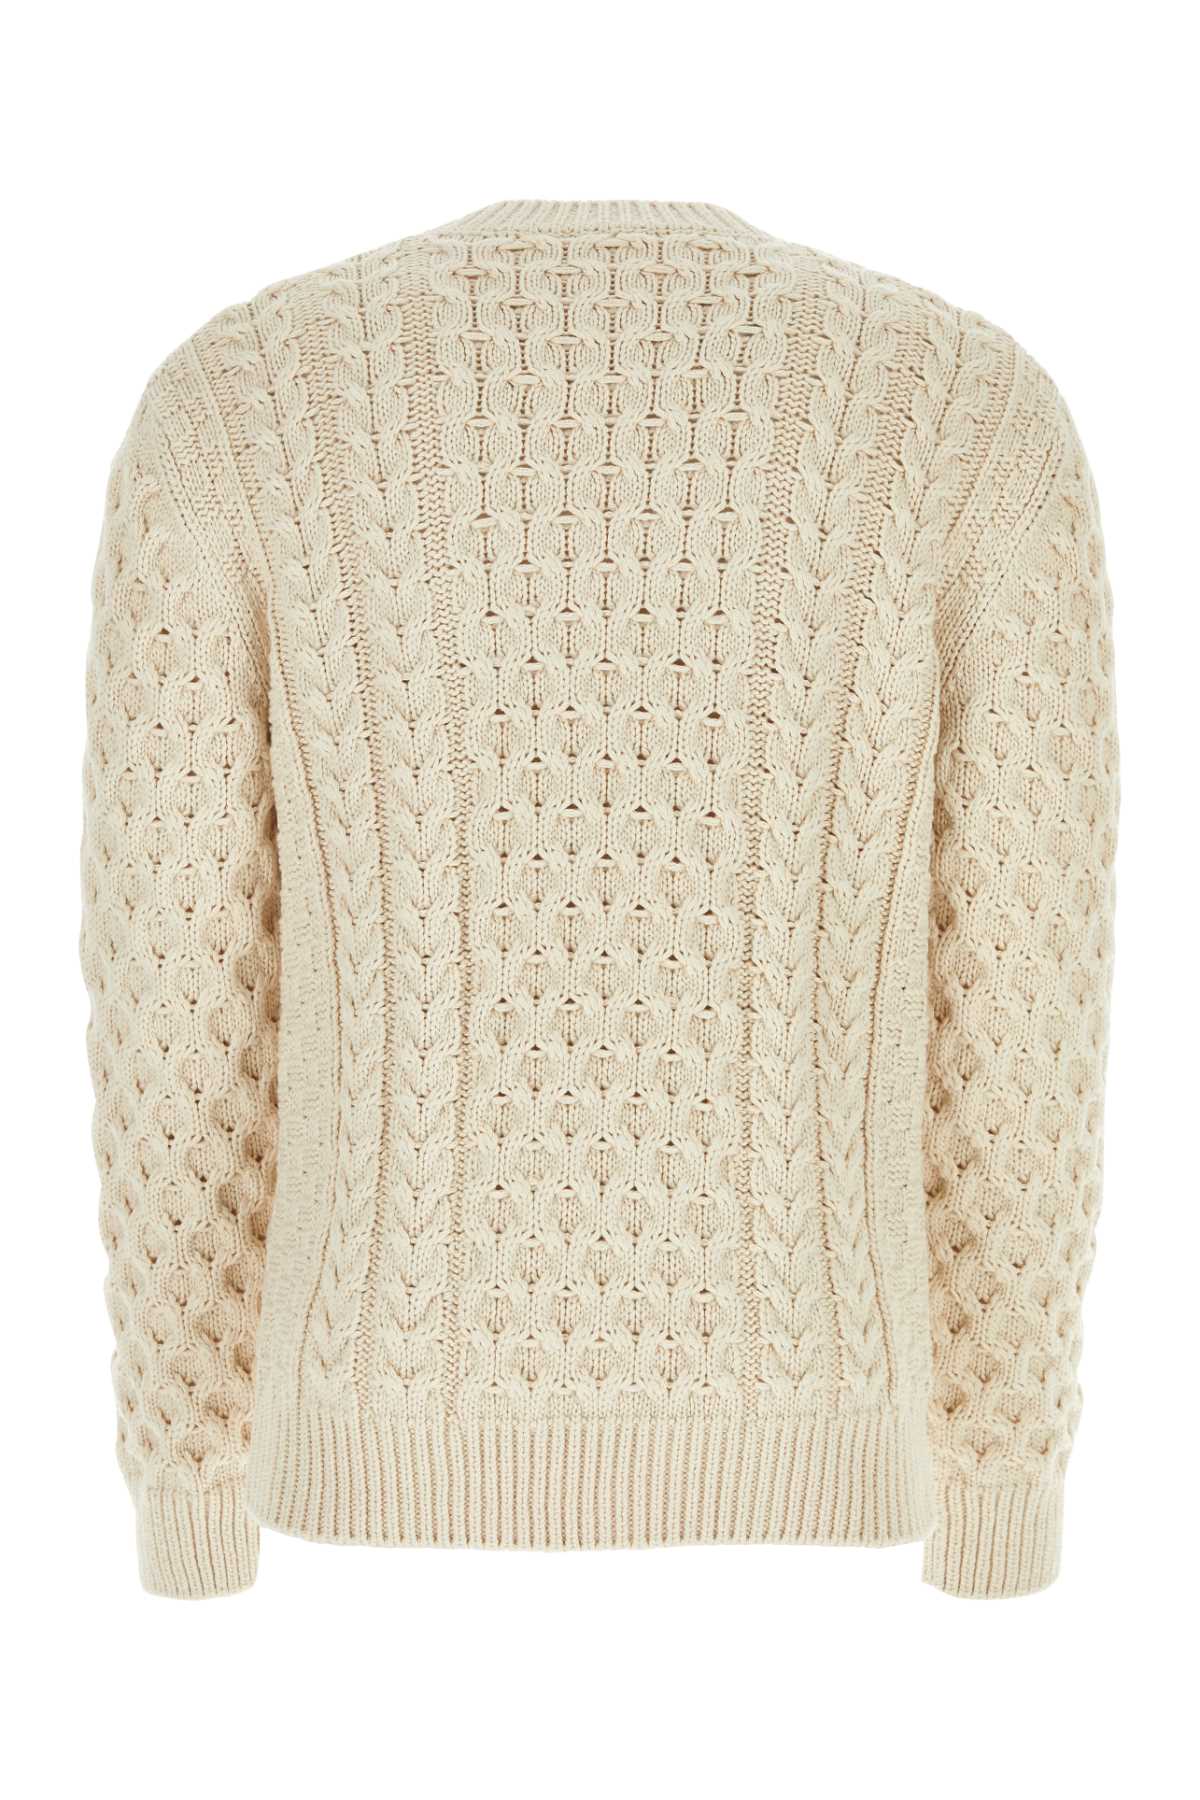 Givenchy Sand Cotton Blend Sweater In Cream